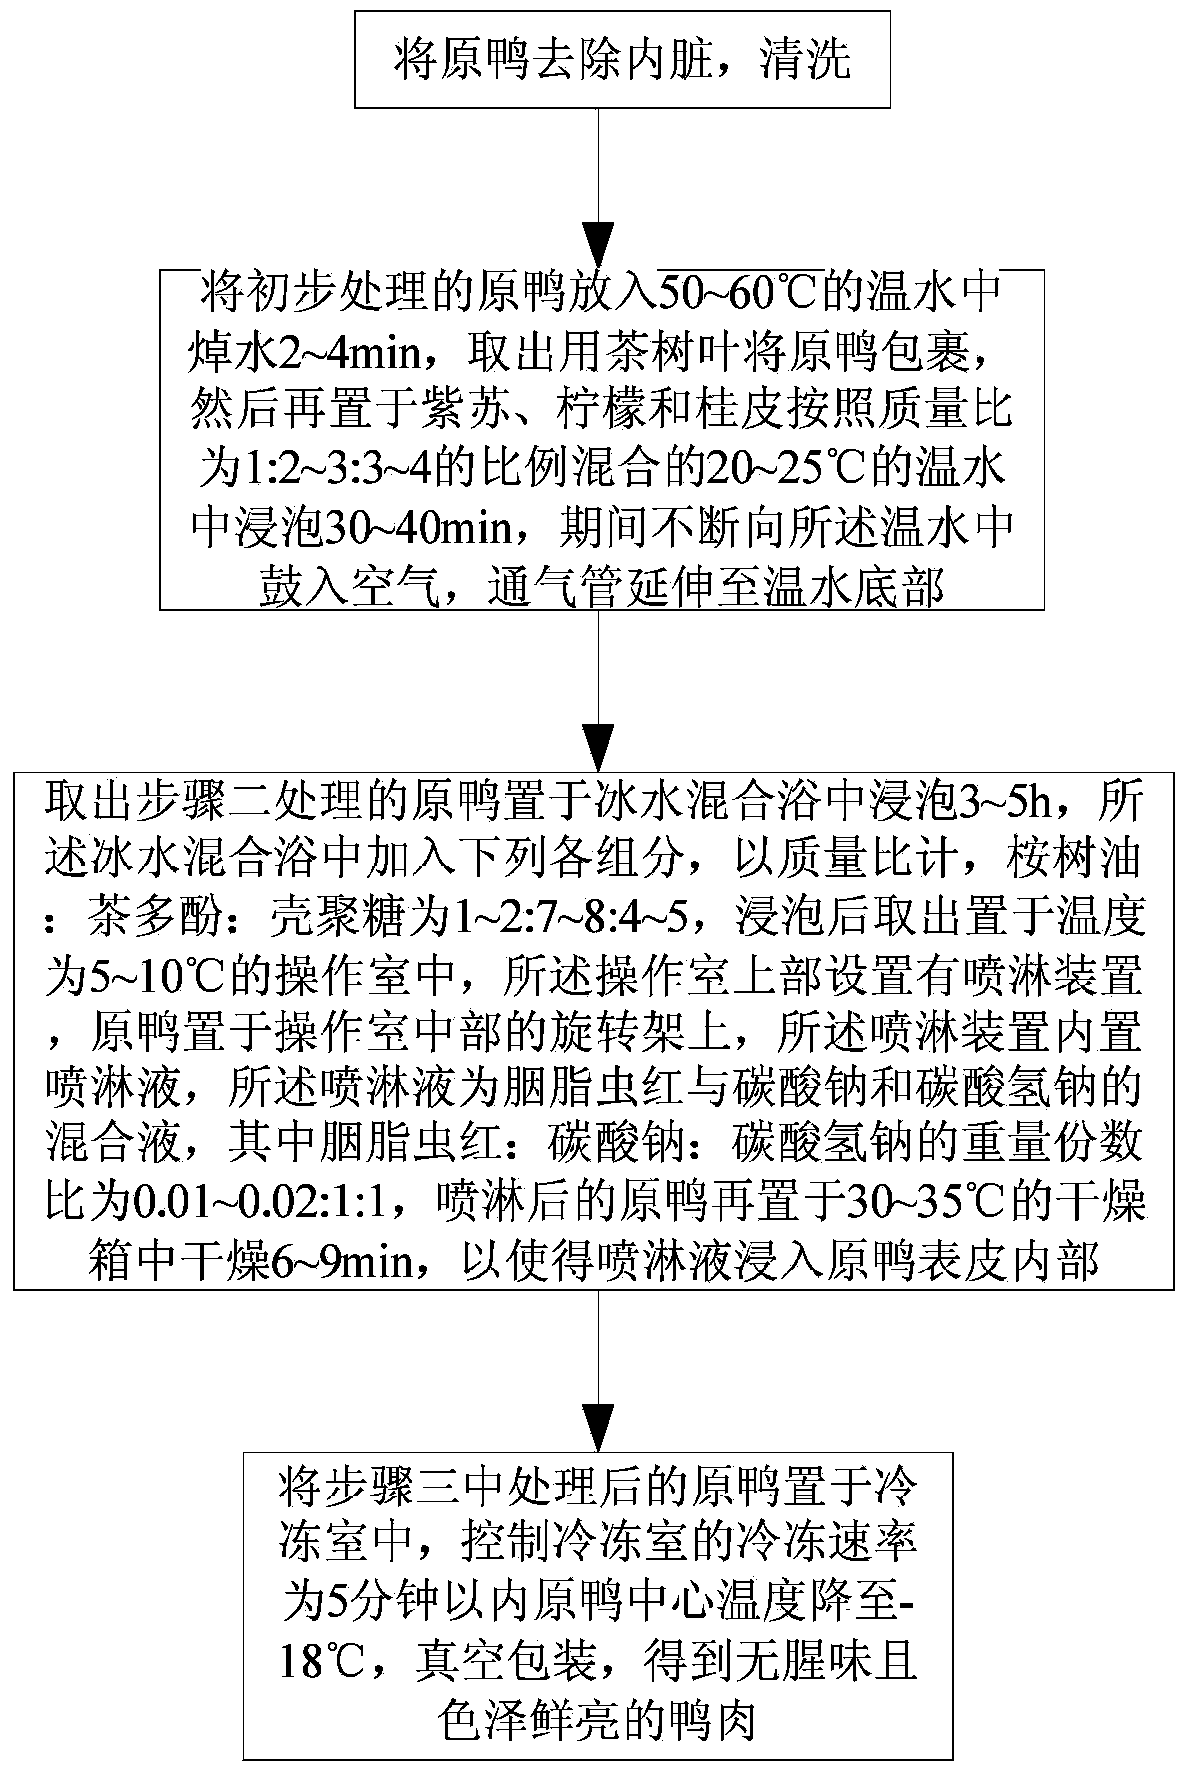 Method for removing fishy smell and protecting color of duck meat